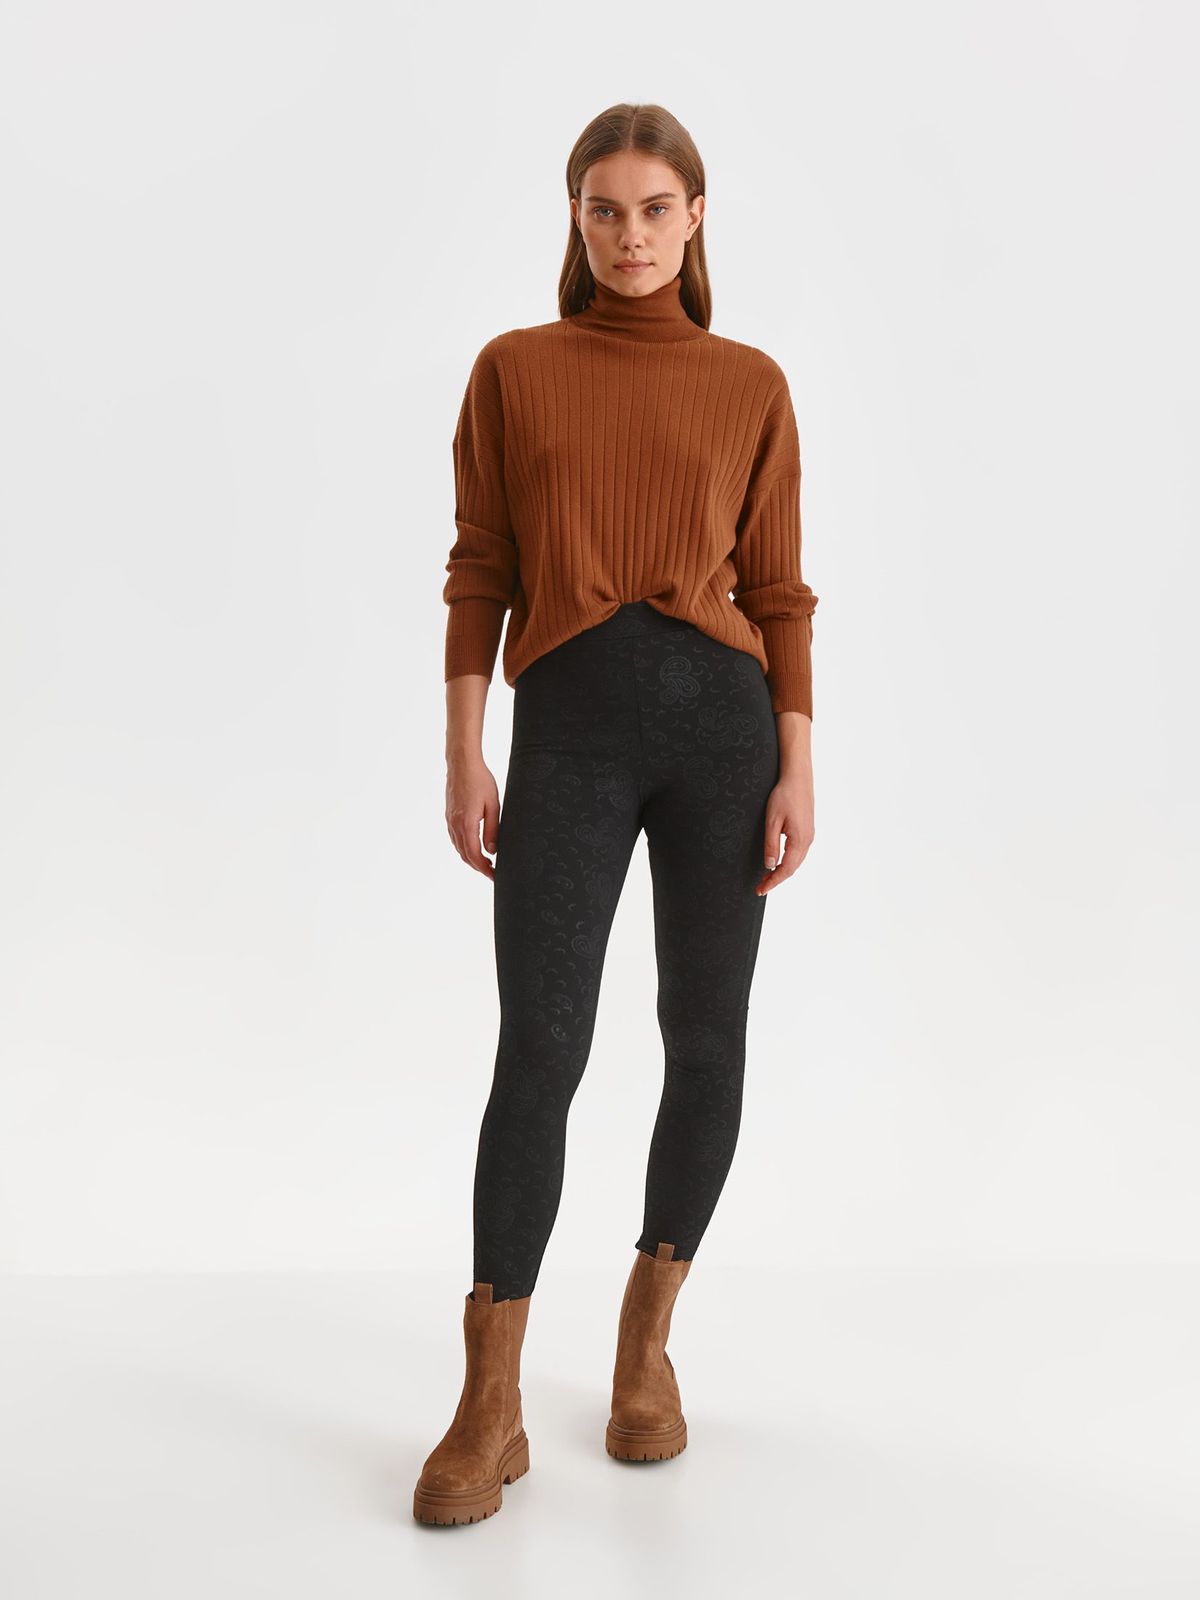 Black tights high waisted textured crepe